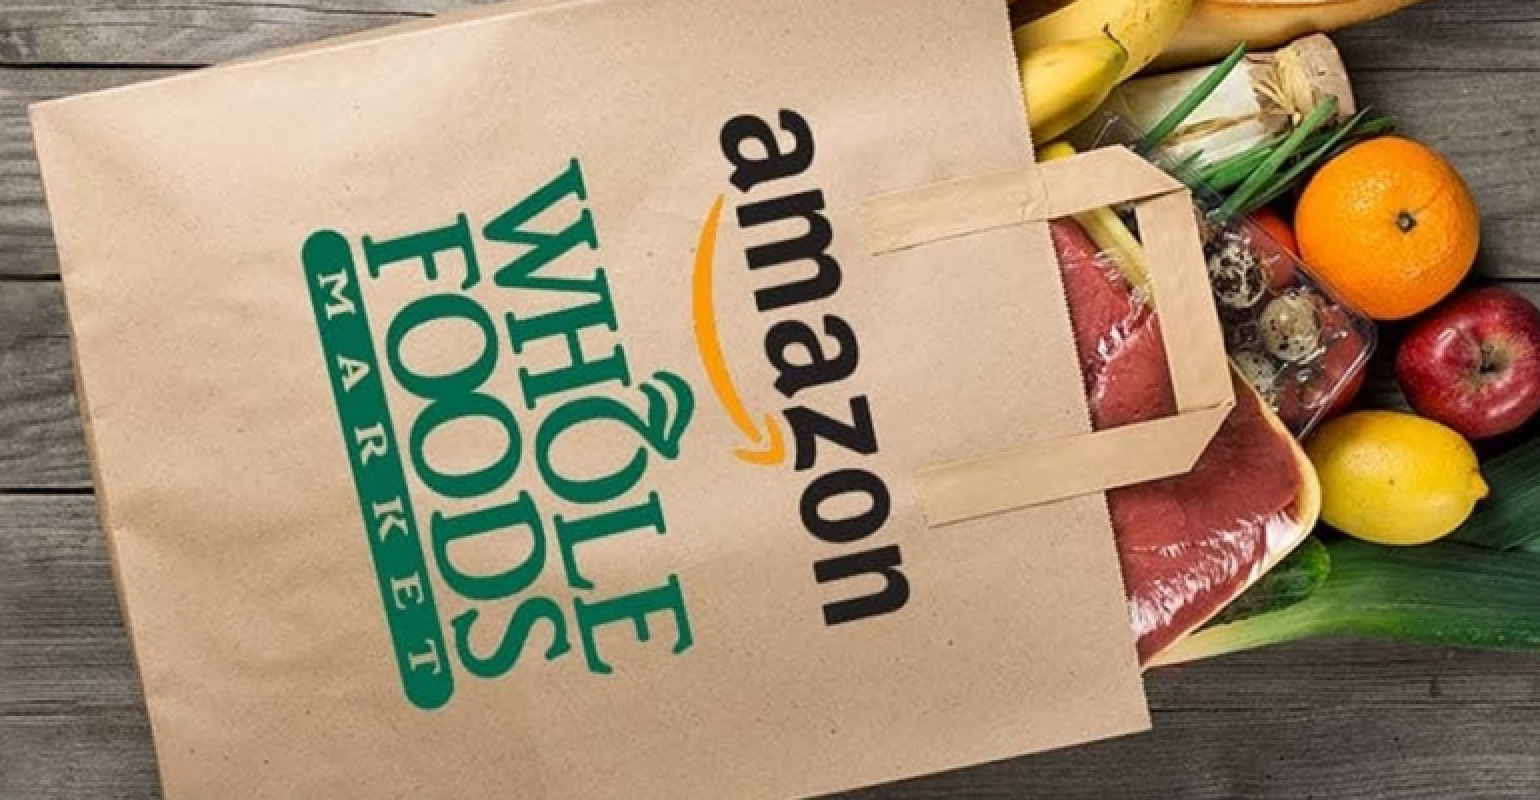 https://www.supermarketnews.com/sites/supermarketnews.com/files/styles/article_featured_retina/public/Amazon_Whole_Foods_Prime_Now_grocery_bag_11_2.png?itok=pwo87lBa